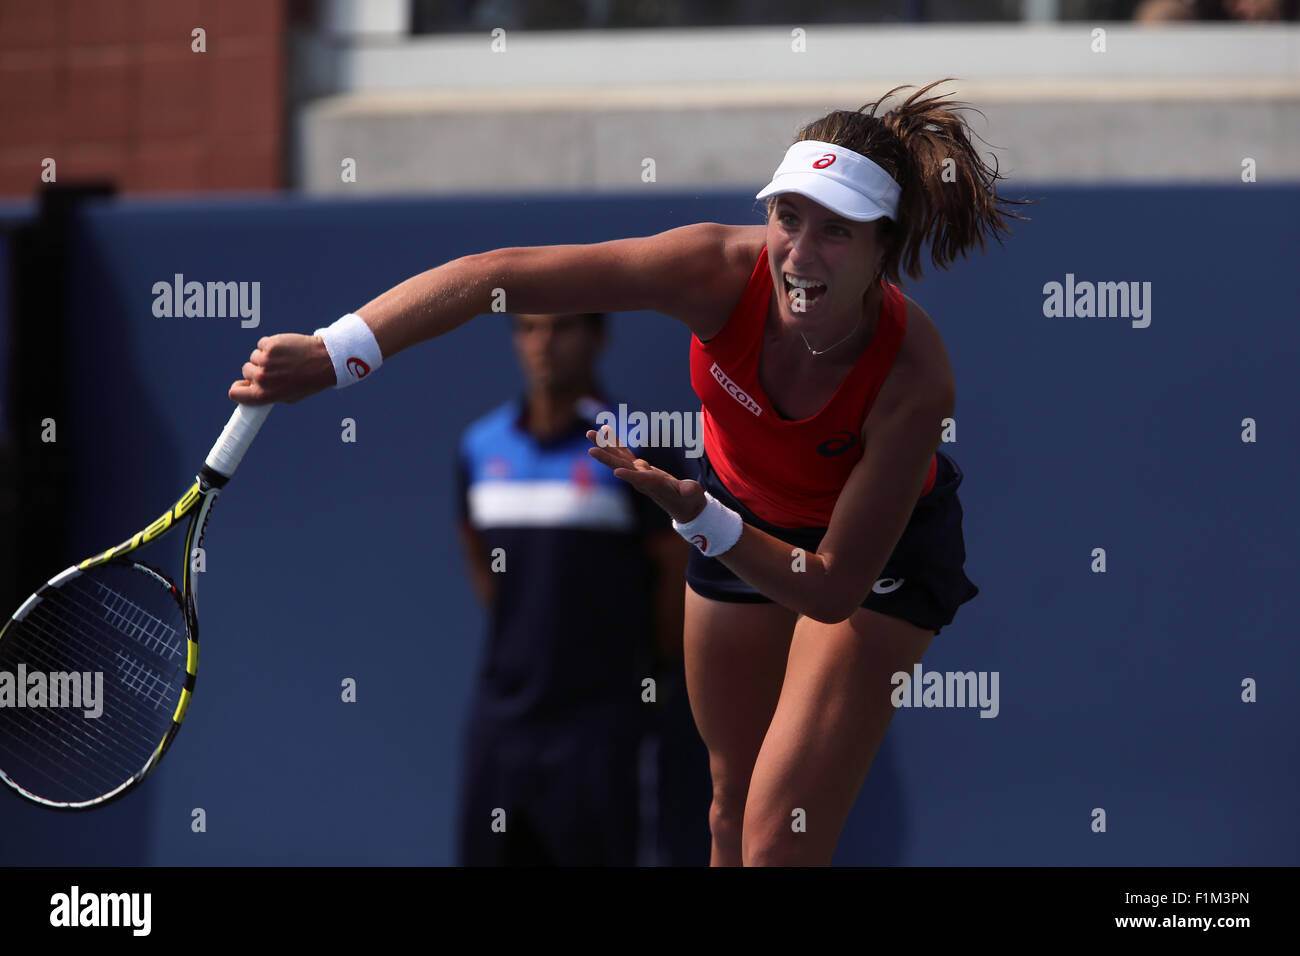 Britain's Johanna Konta en route to an upset  victory over Spain's Garbine Muguruza, the number 9 seed, during their second round match at the U.S. Open in Flushing Meadows, New York. Stock Photo